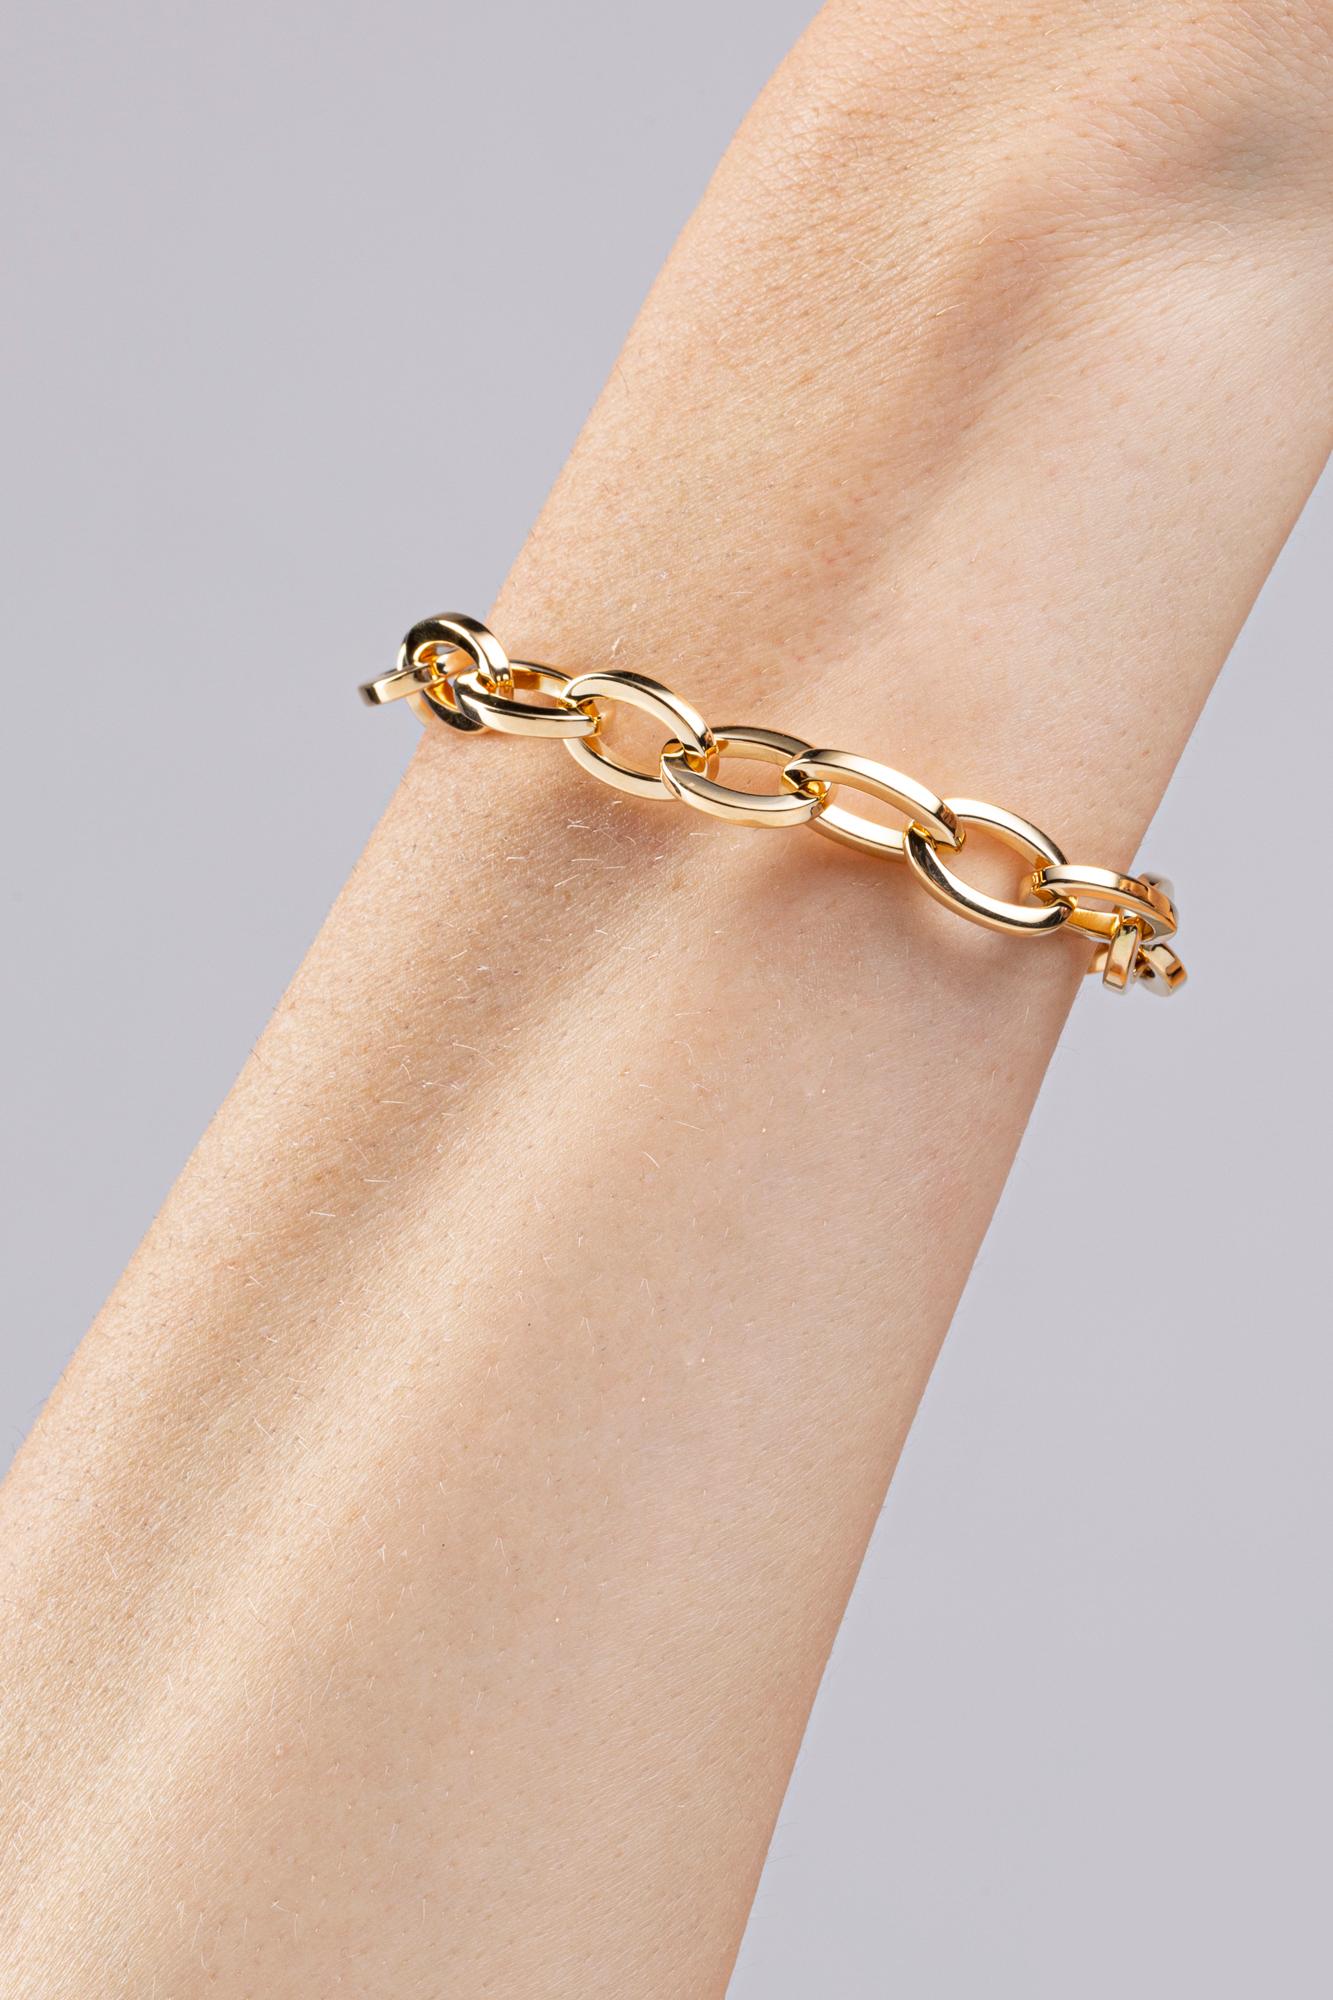 Alex Jona design collection, hand crafted in Italy, 18 karat rose gold 8 in. long chain bracelet.
Dimensions: L 8.071 in / 20.5 cm X W 0.31 in / 7.88 mm X D 0.065 in / 1.66 mm . Weight : 13.8 g

Alex Jona jewels stand out, not only for their special